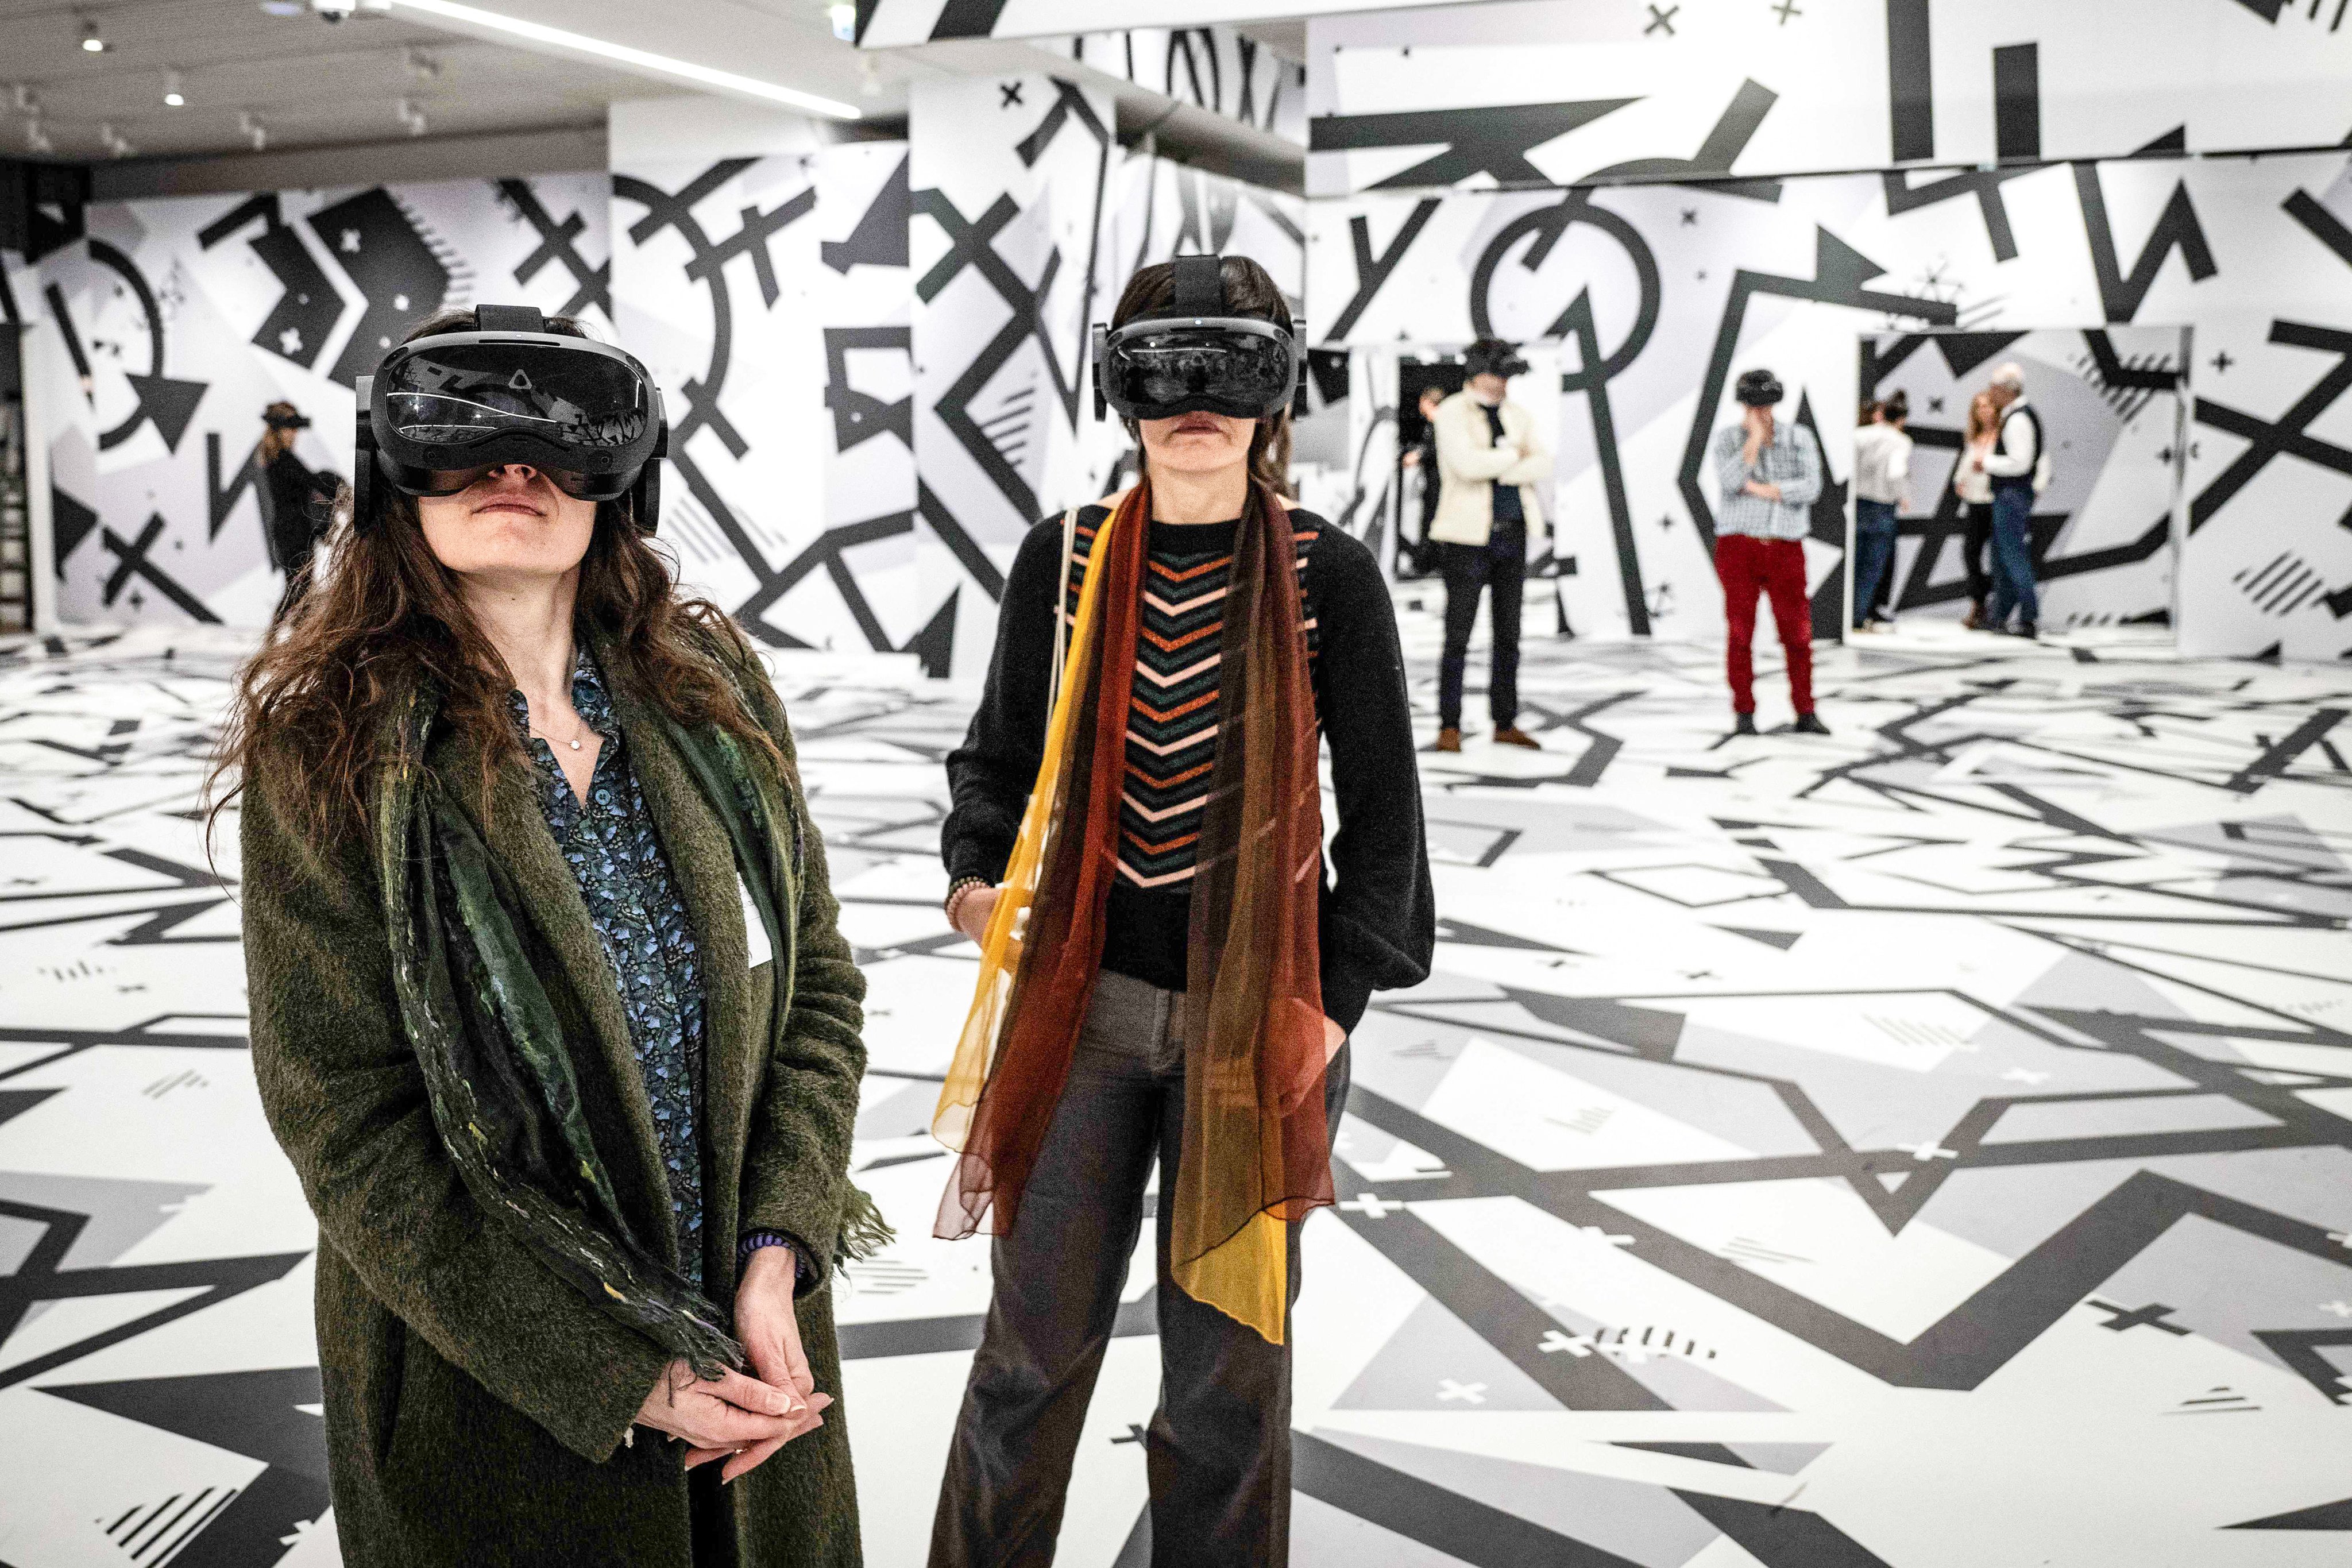 Wearing VR headsets, visitors to Paris’ Orsay Museum are transported back to the dawn of Impressionism in 1874 Paris. Photo: AFP